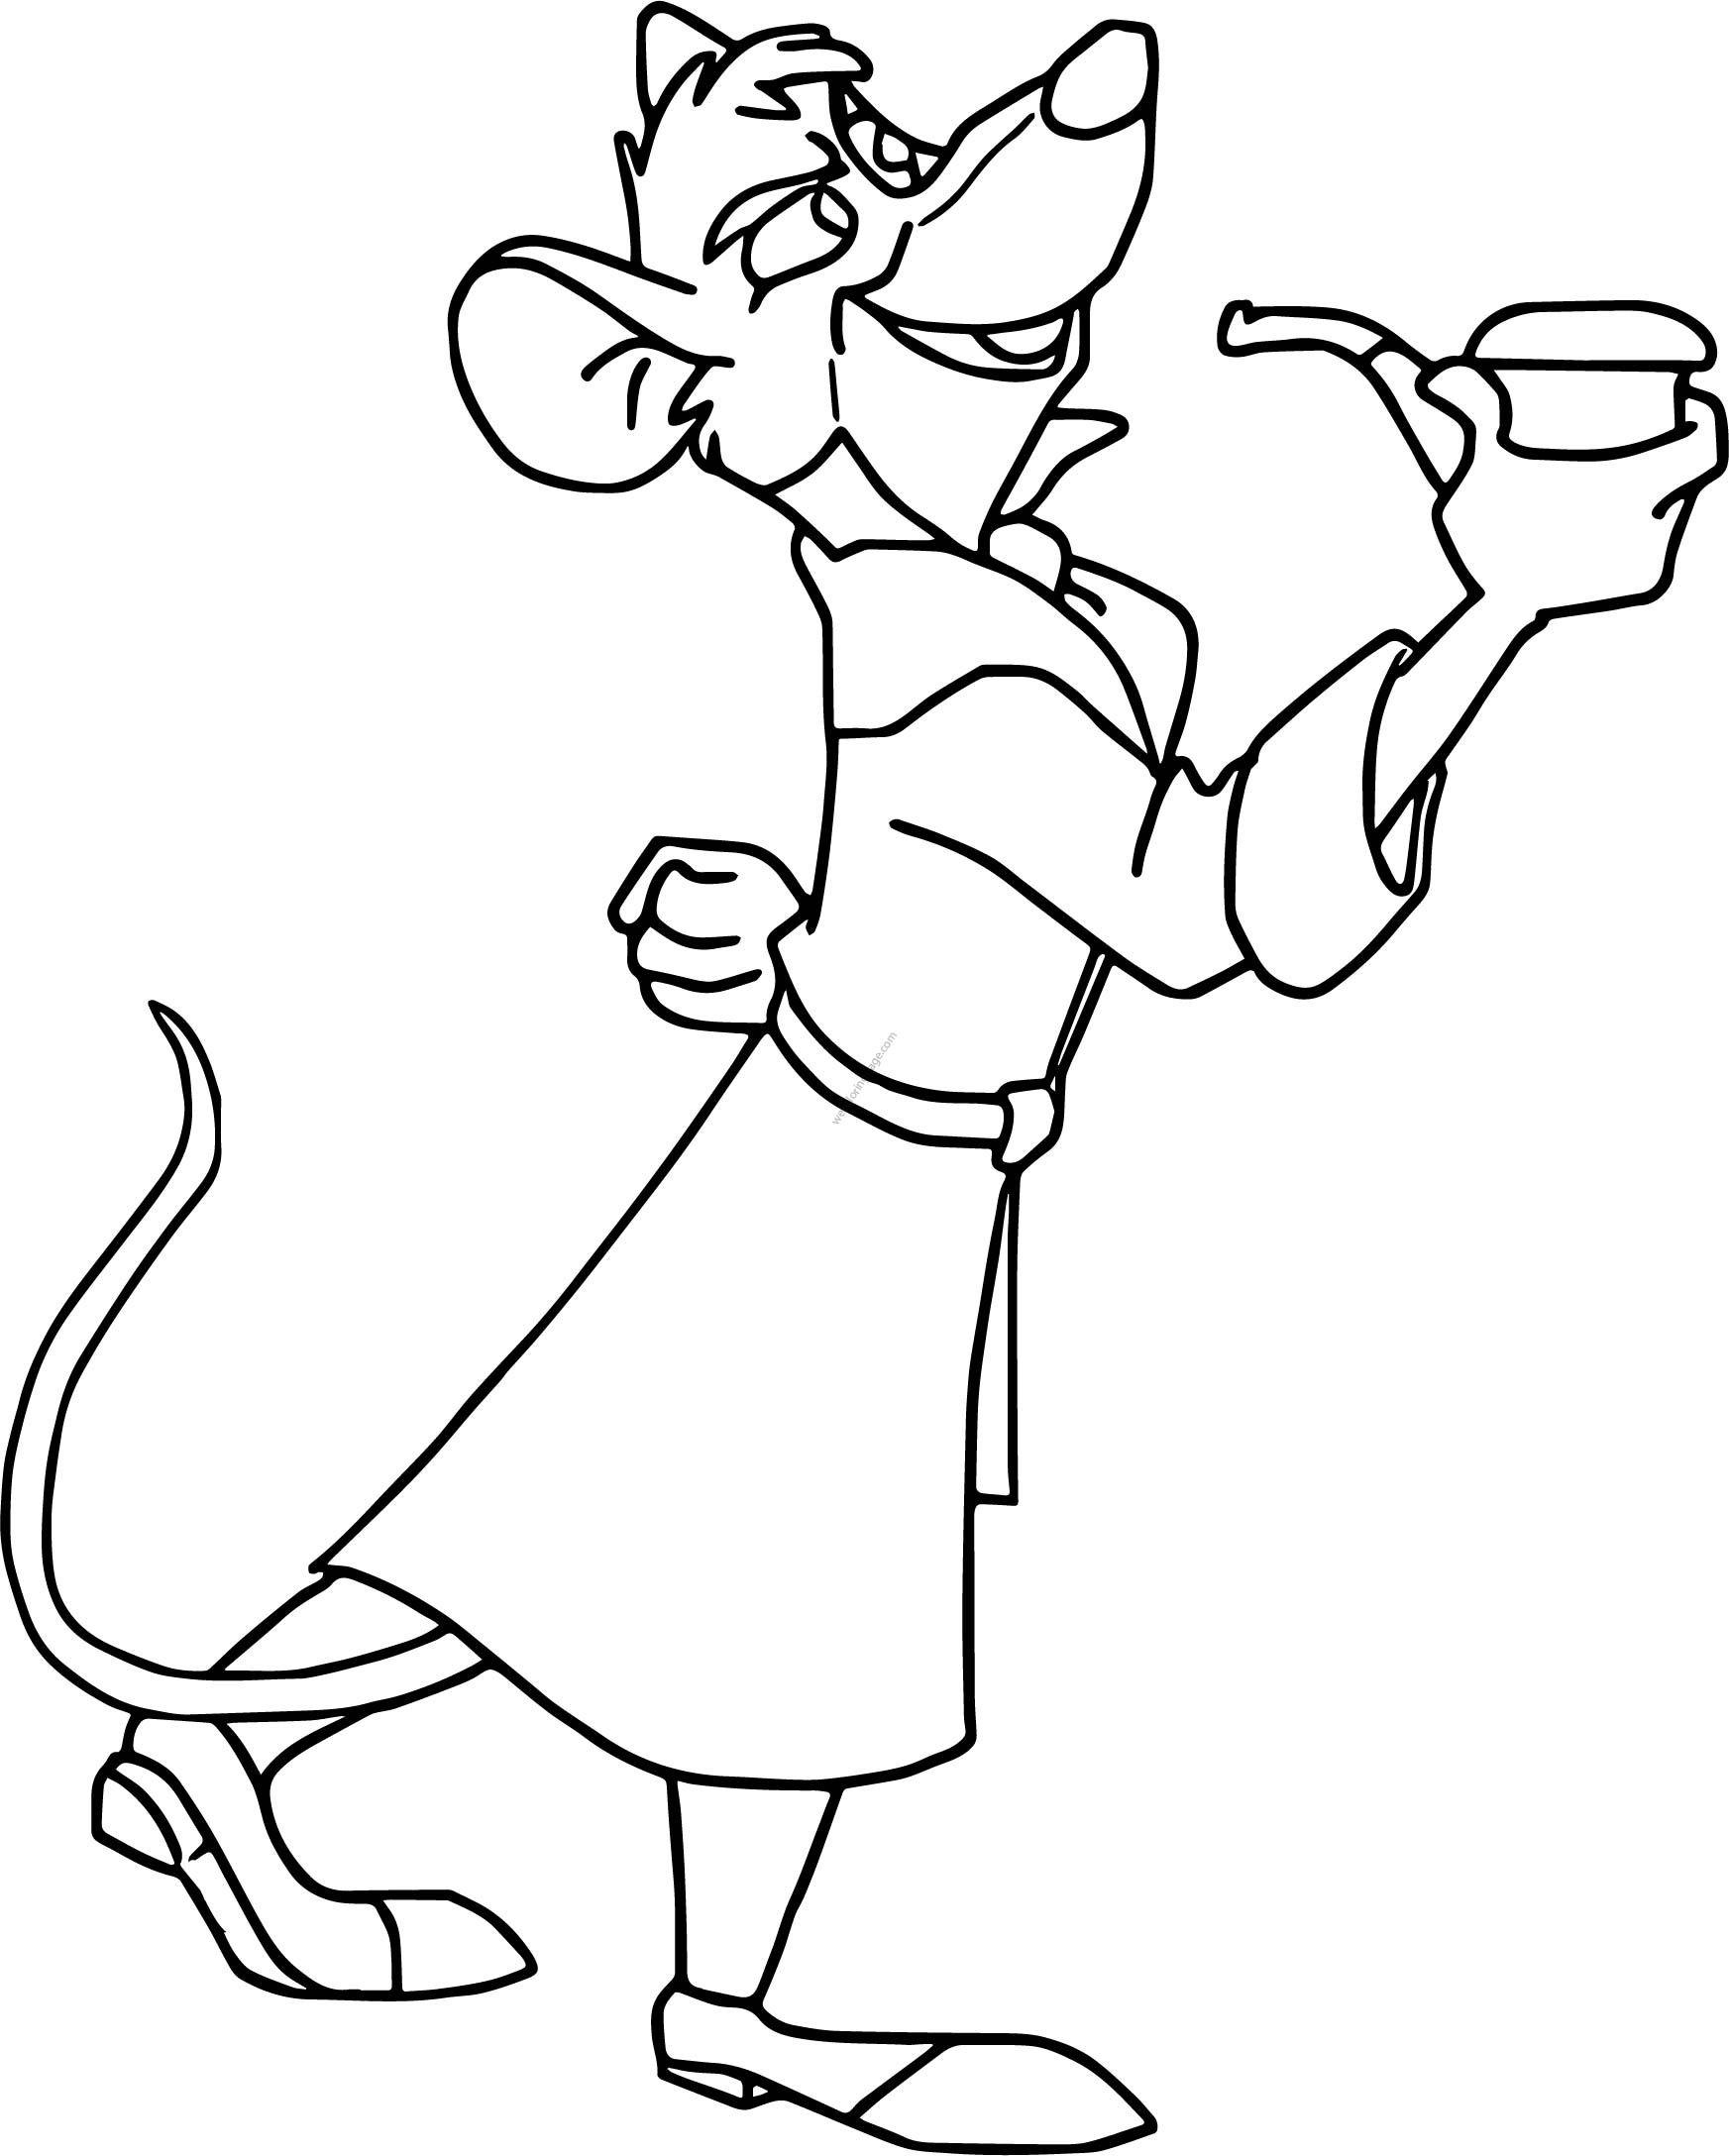 Detective Coloring Pages at GetDrawings.com | Free for personal use